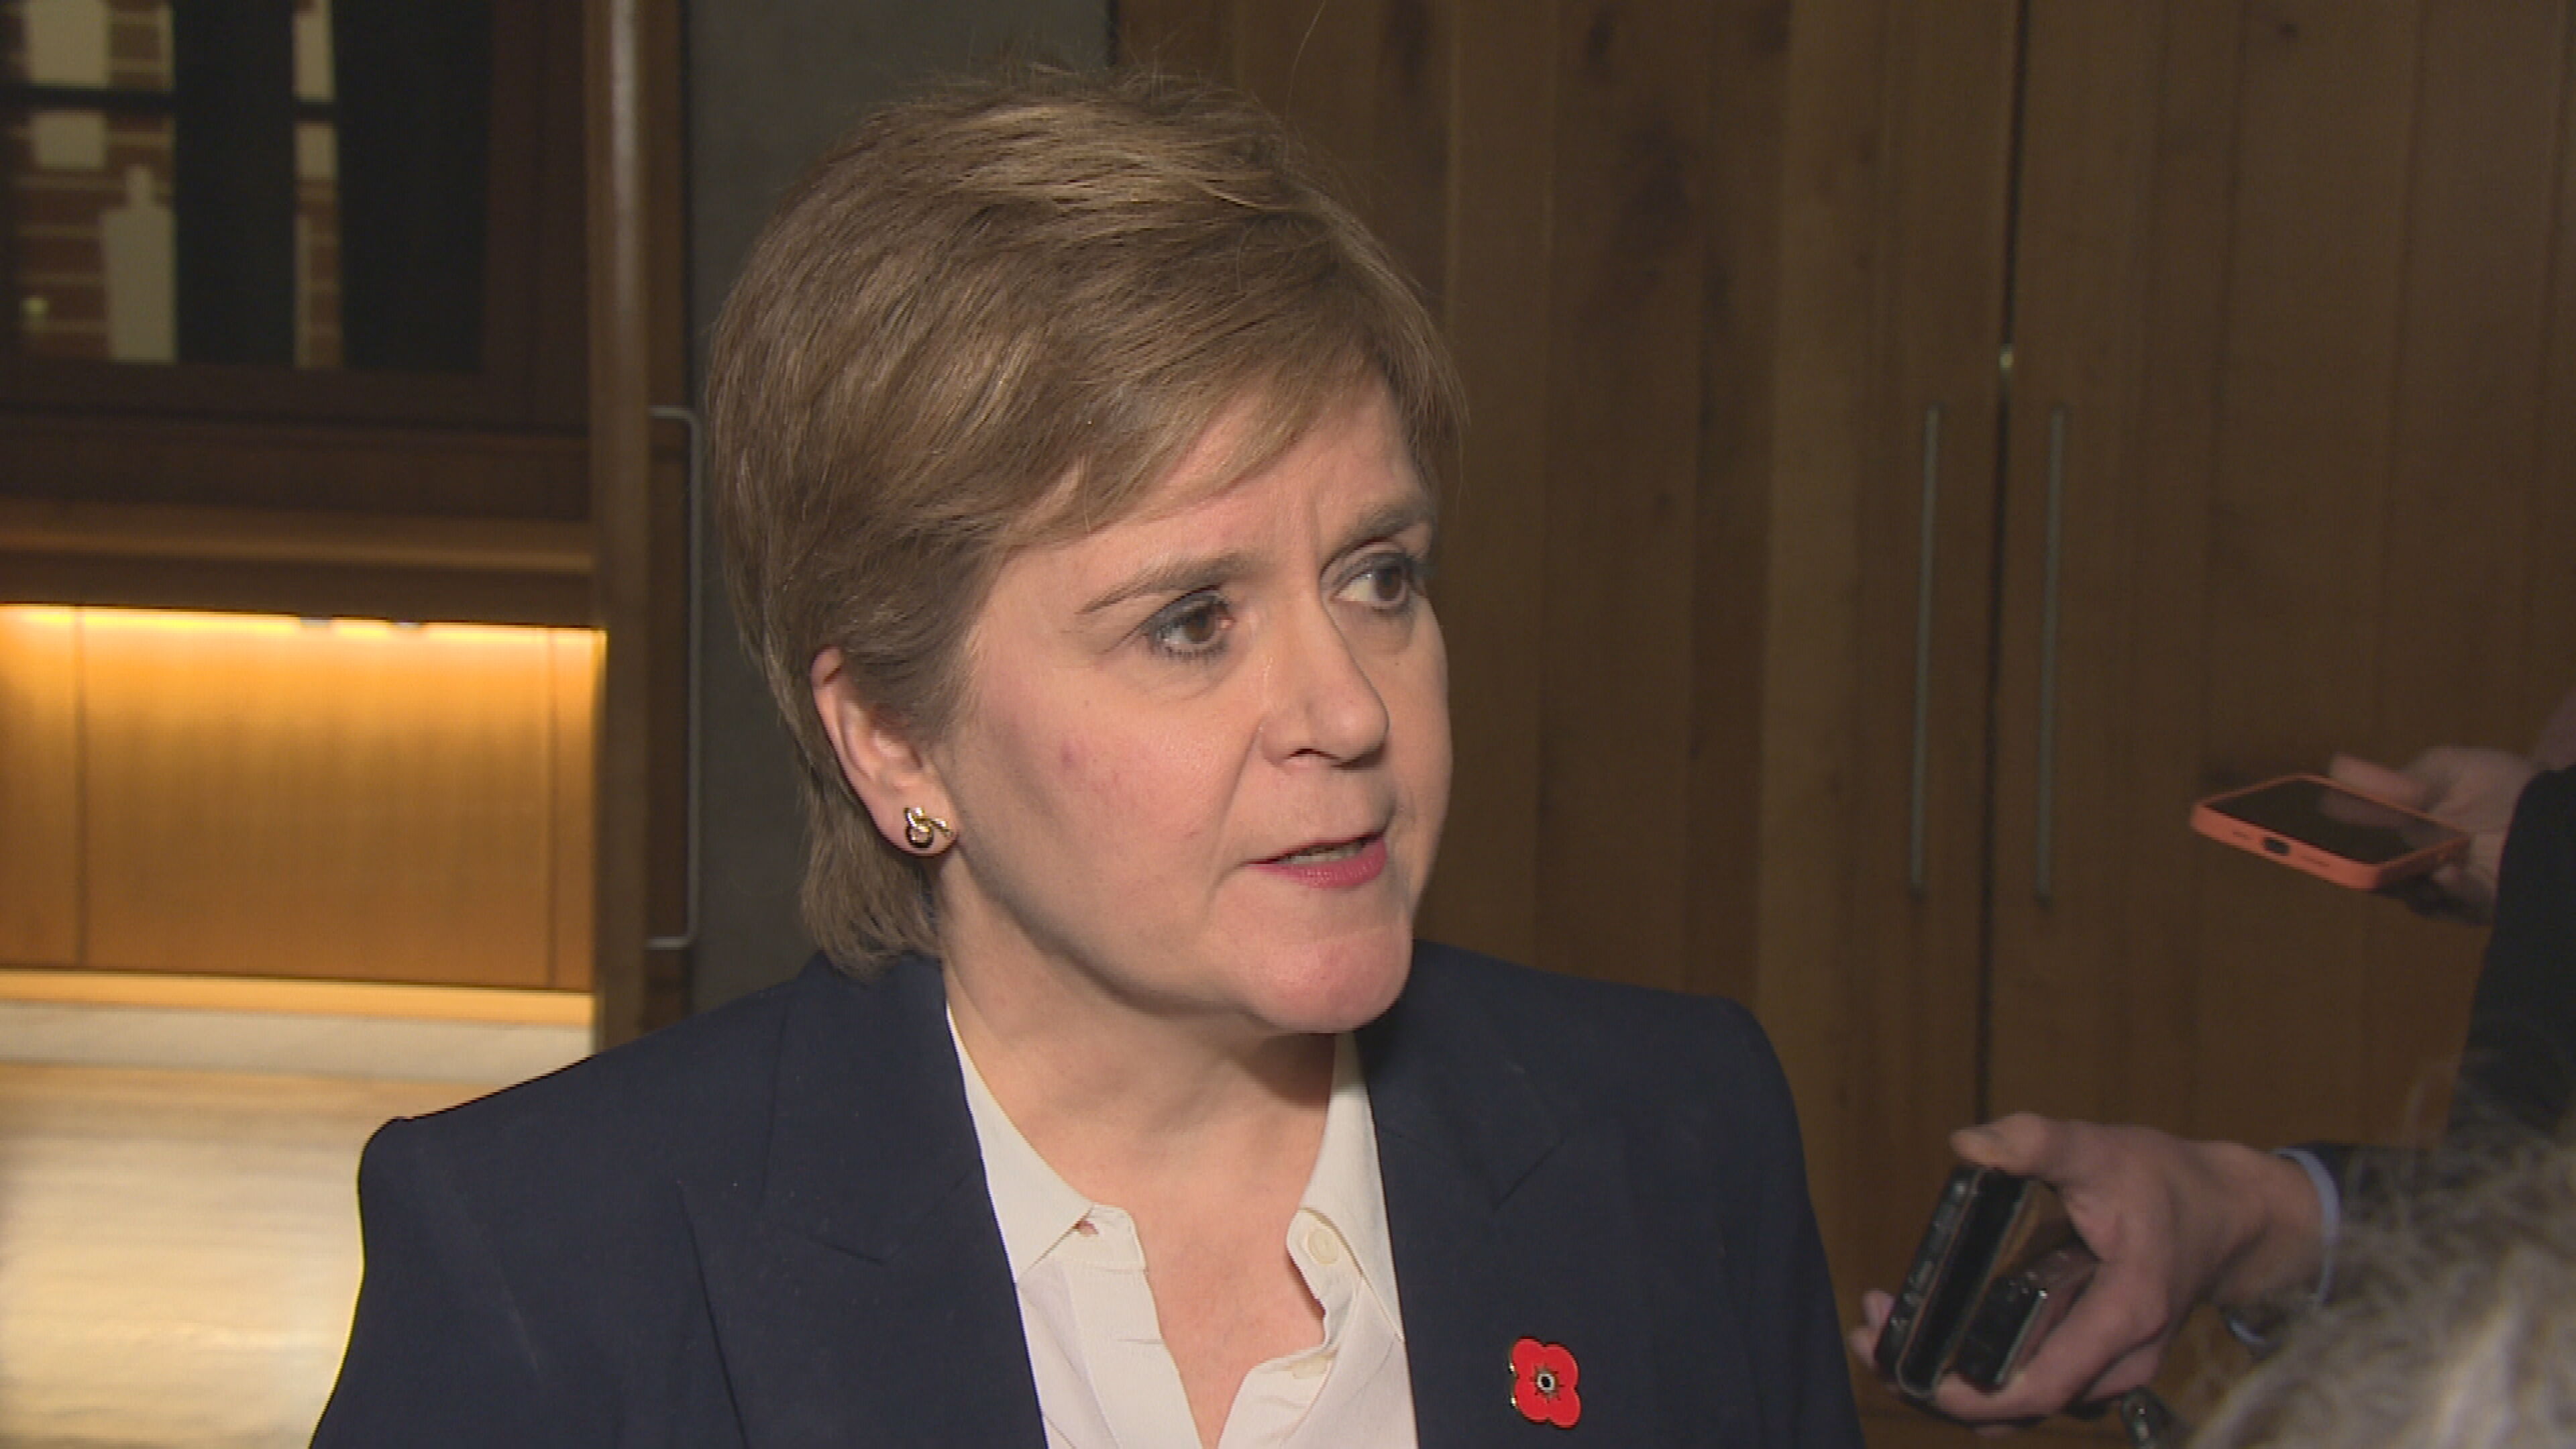 The former First Minister said she 'handled' messages in line with policy at the time.